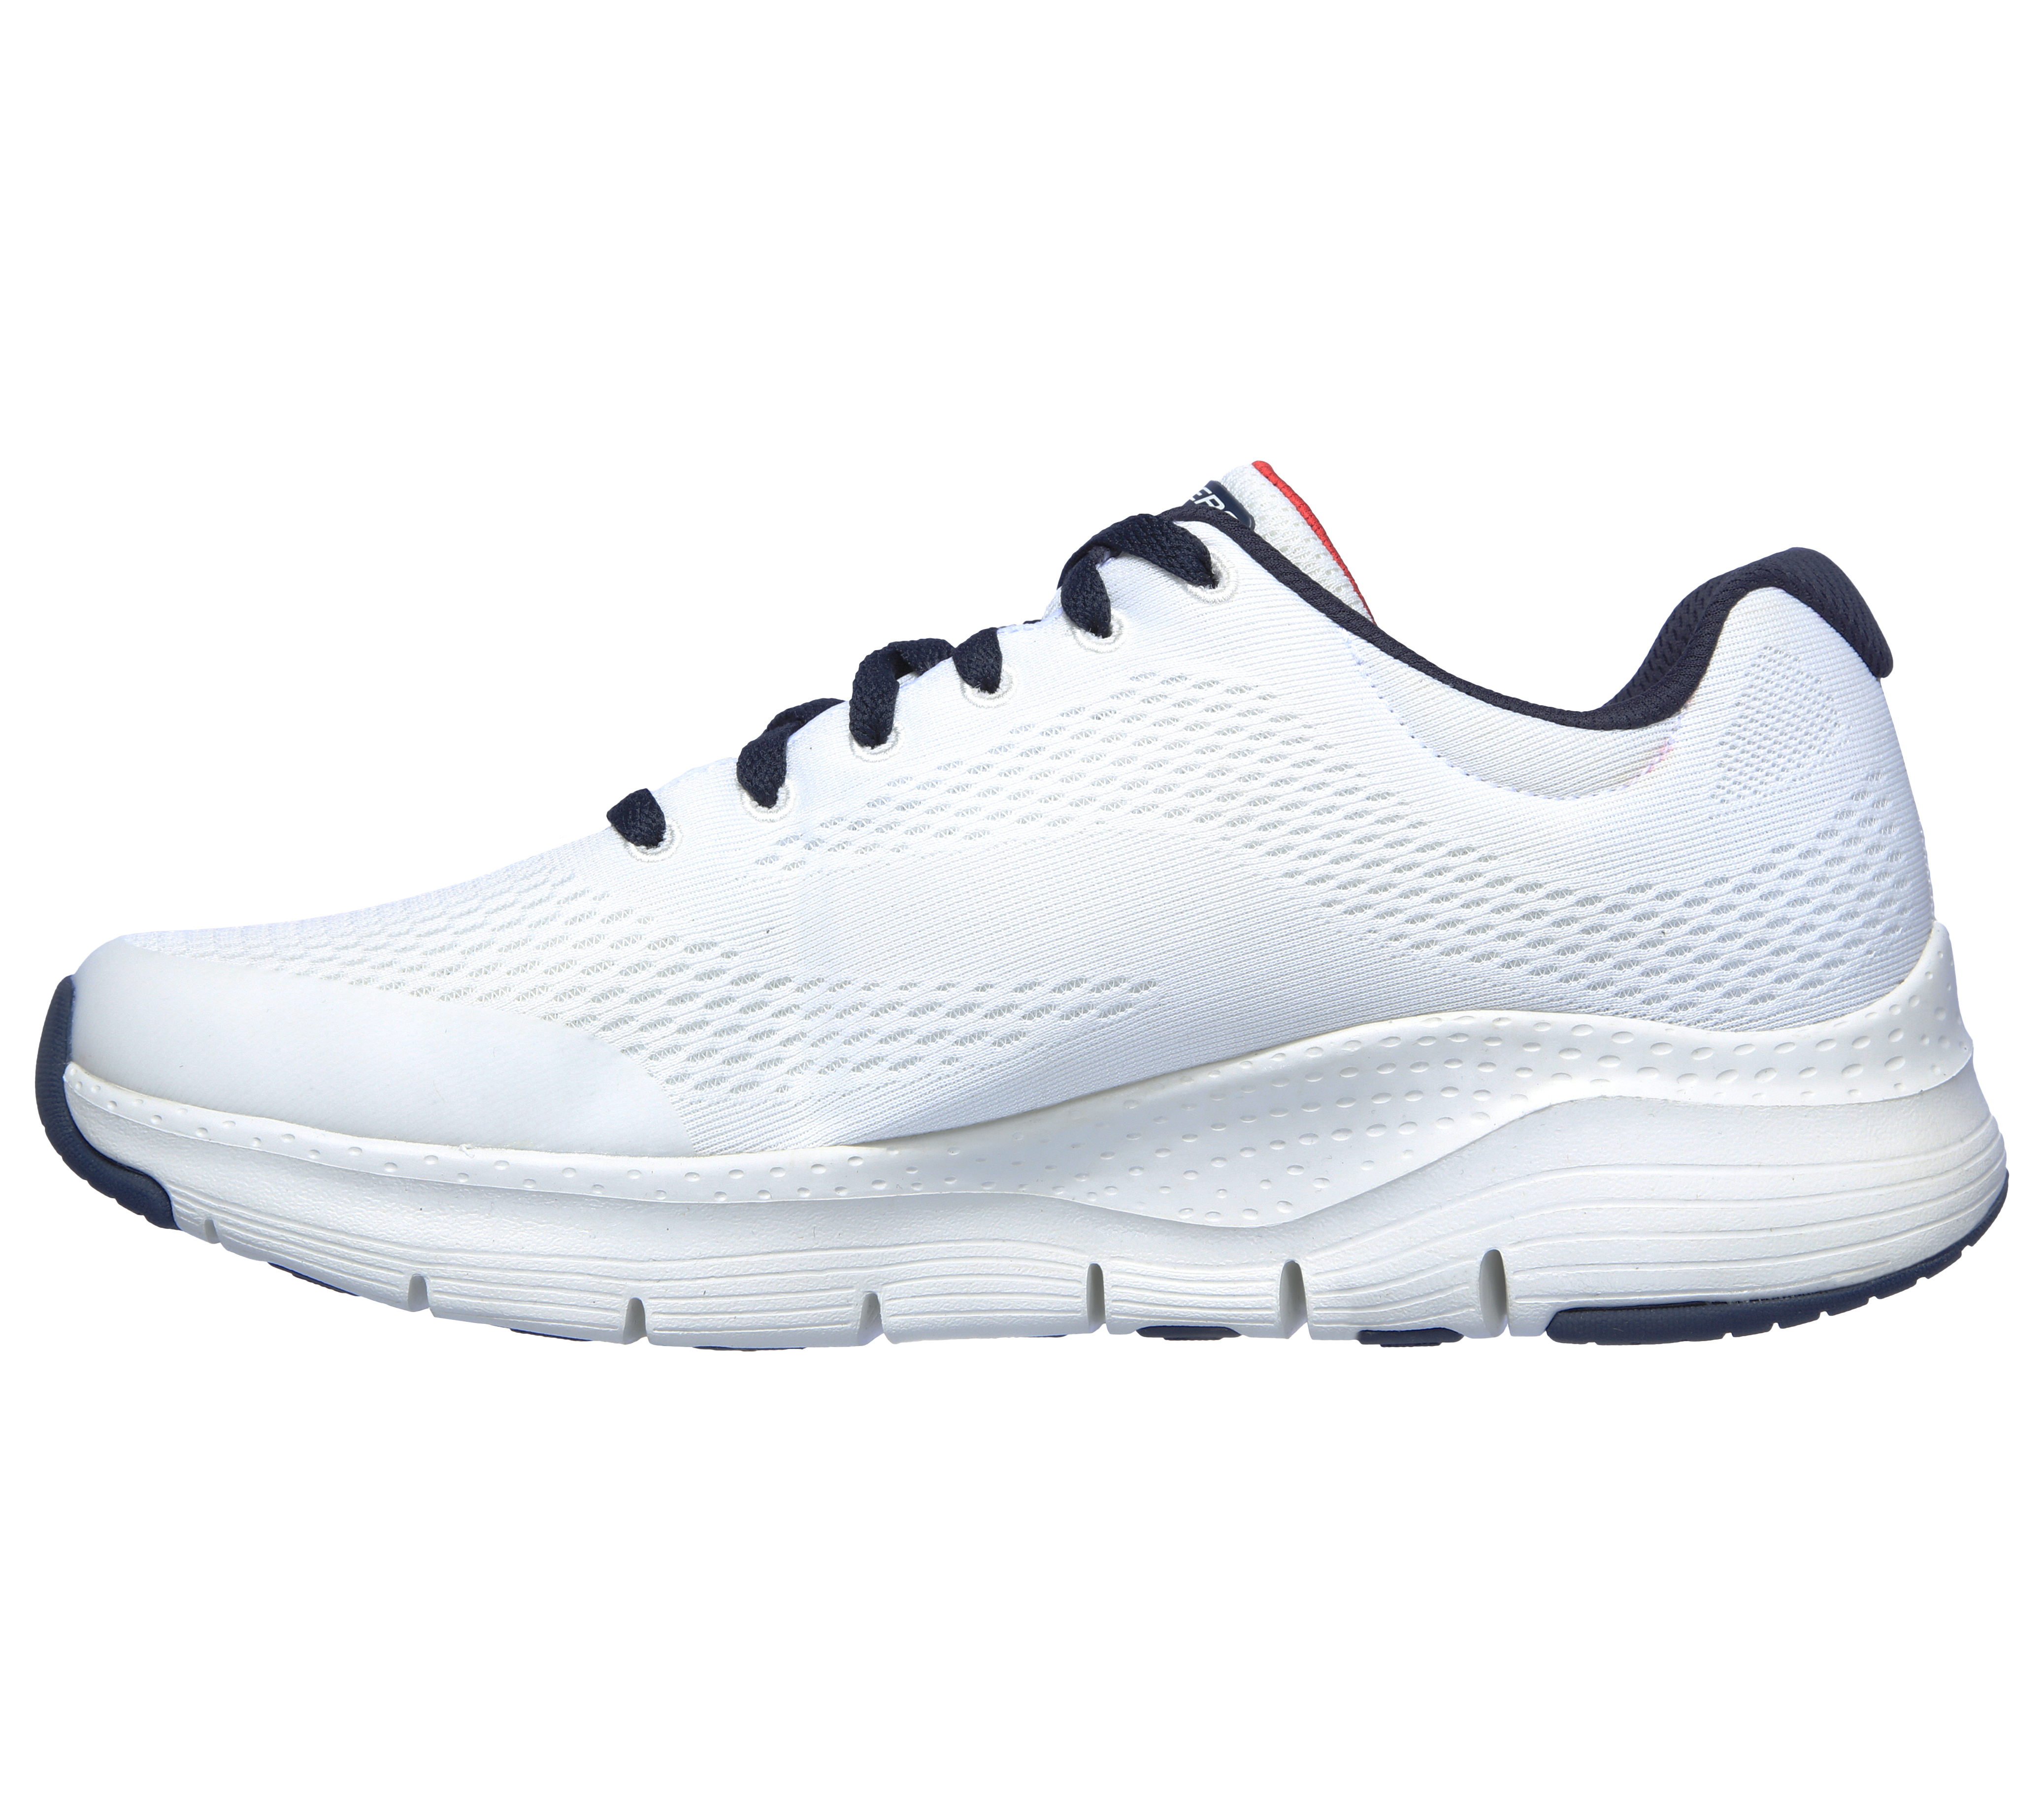 skechers shoes for high arches